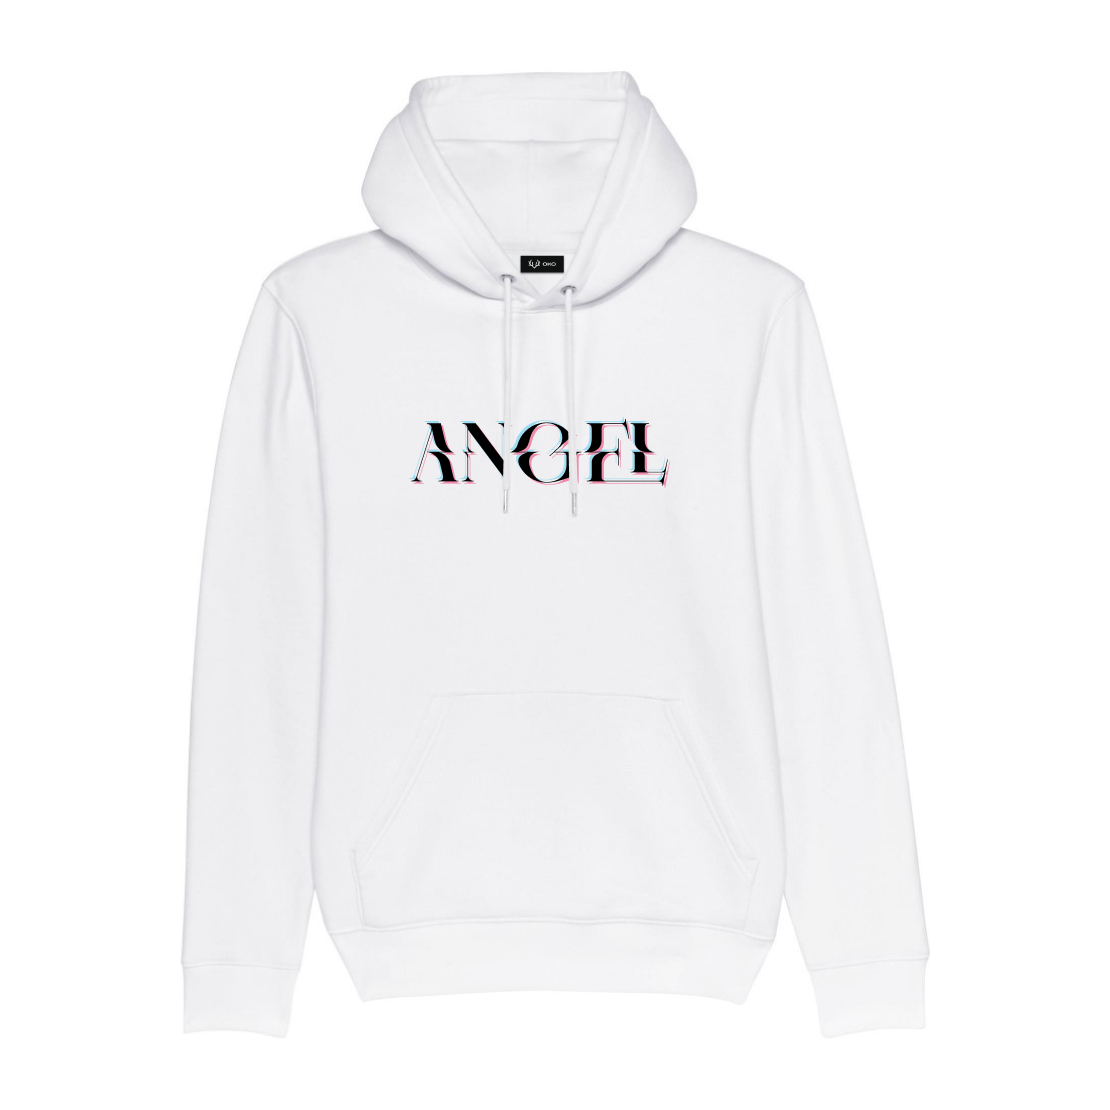 Glitched "Angel" digital 3d effect black text print on a white unisex hoodie